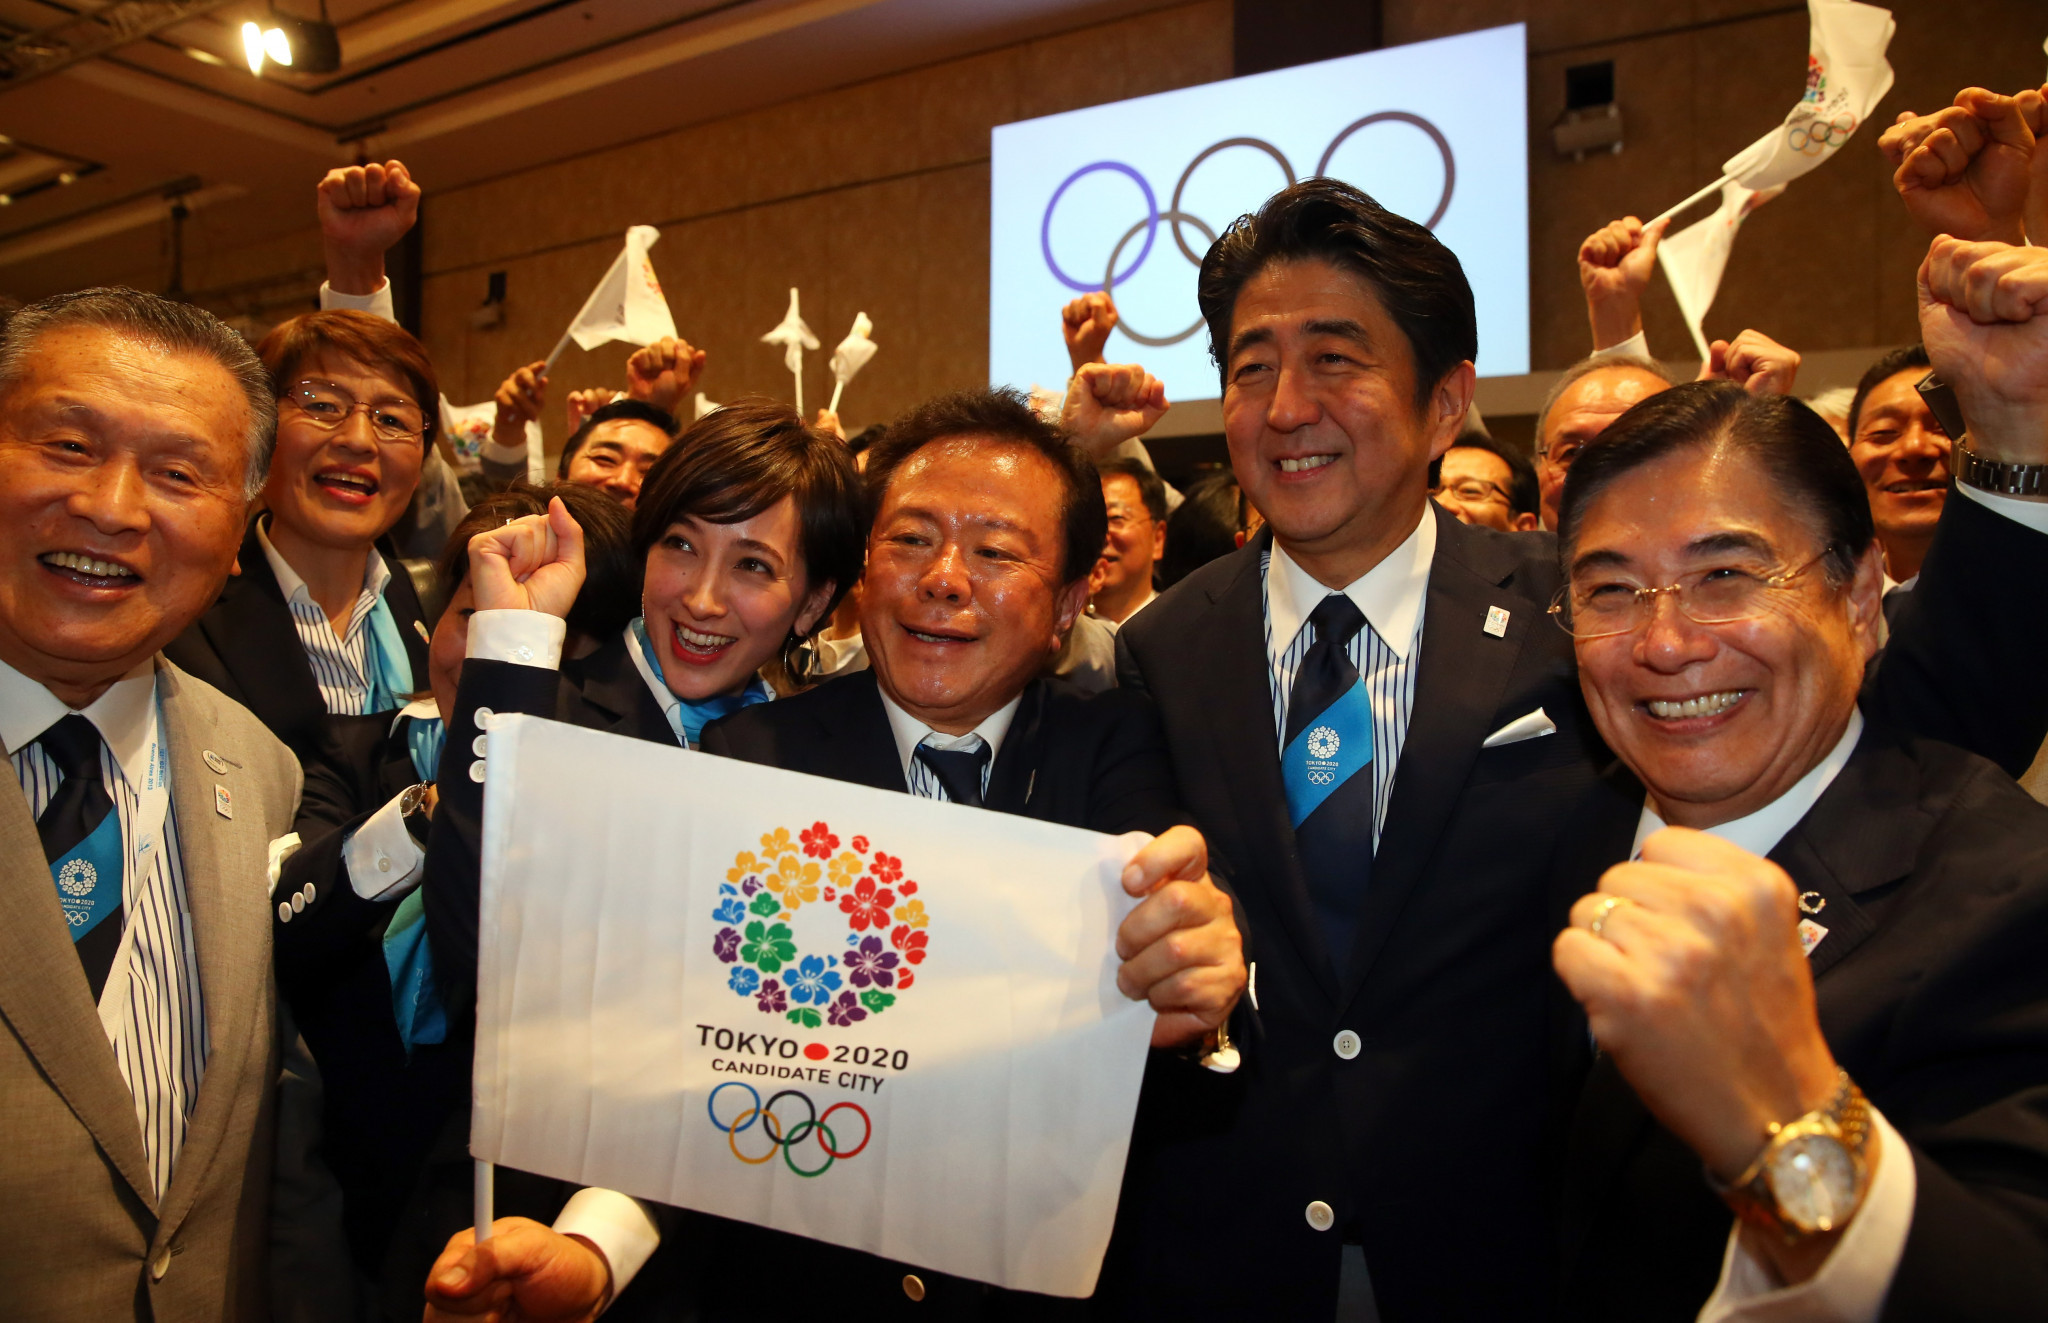 Tokyo was named as host of the 2020 Olympic and Paralympic Games at the 2013 IOC Session in Buenos Aires ©Getty Images